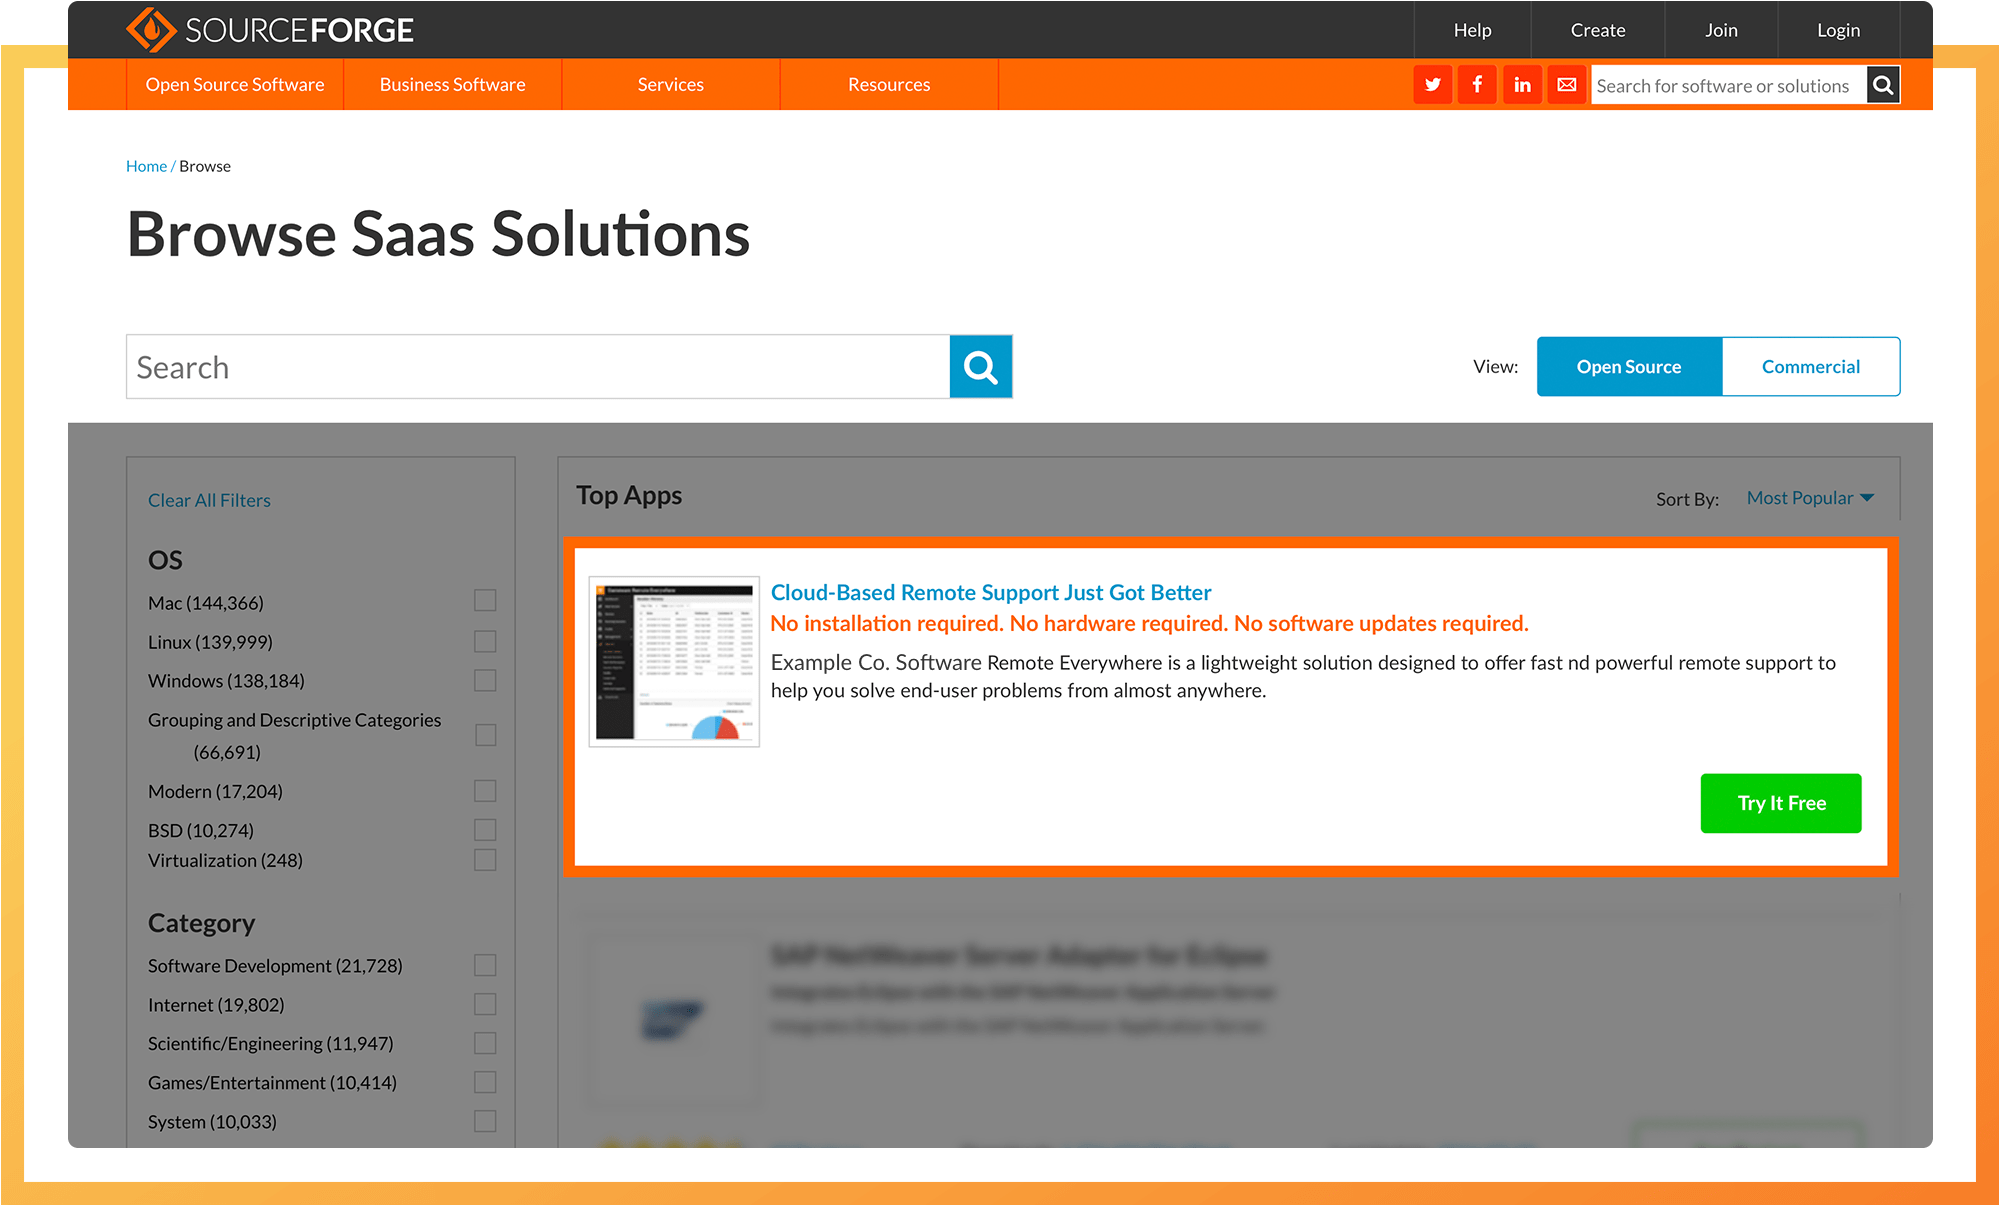 SourceForge Native Ad Listing  example